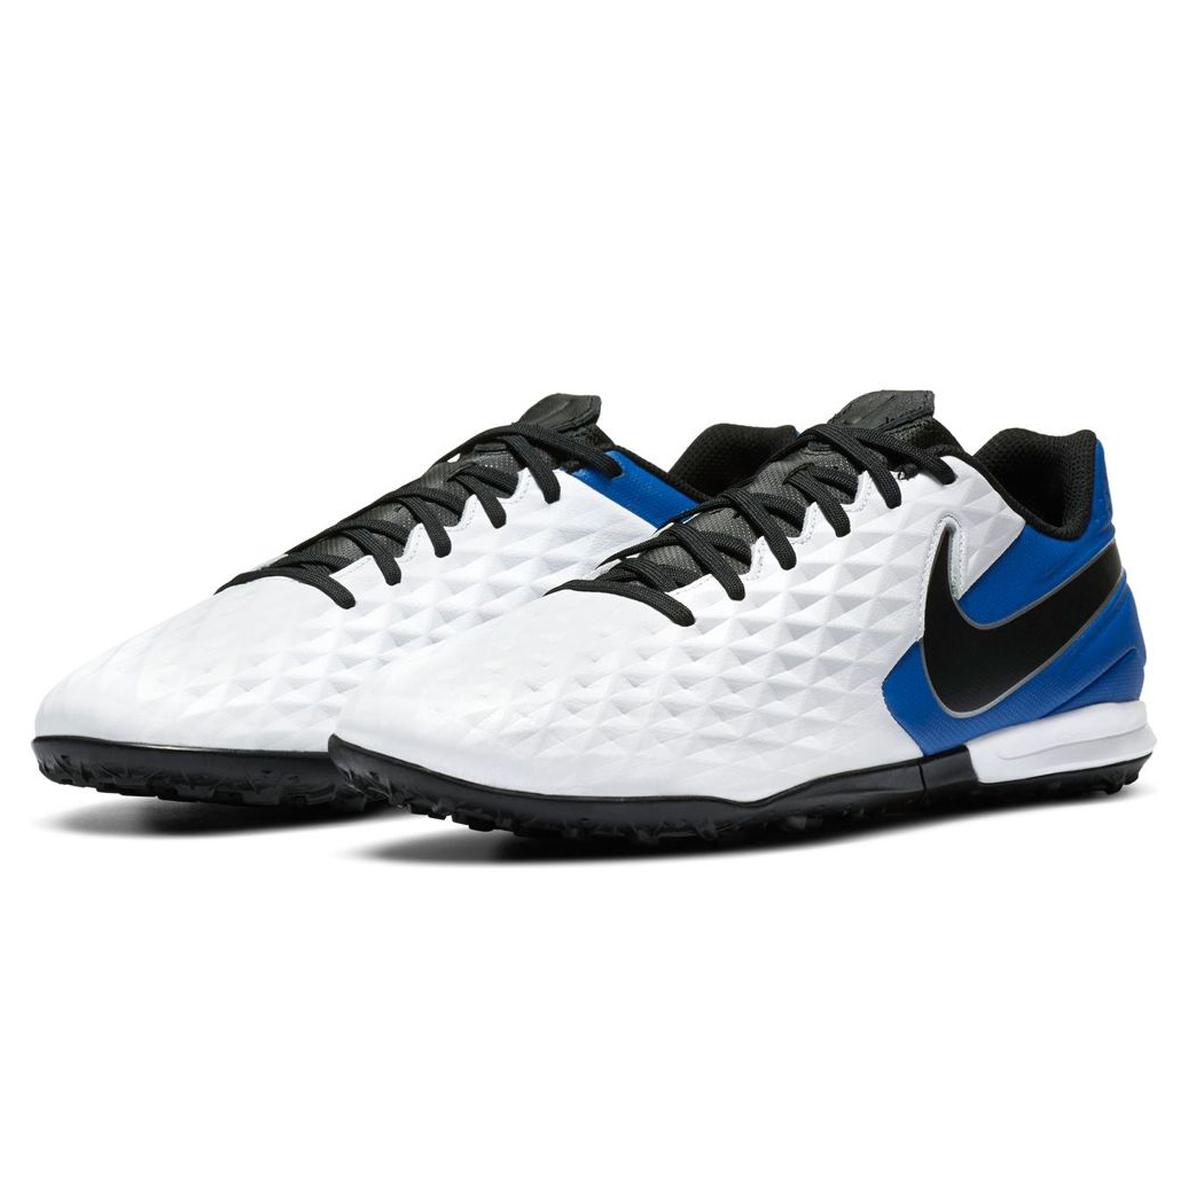 Botines Nike Legend 8 Academy TF,  image number null